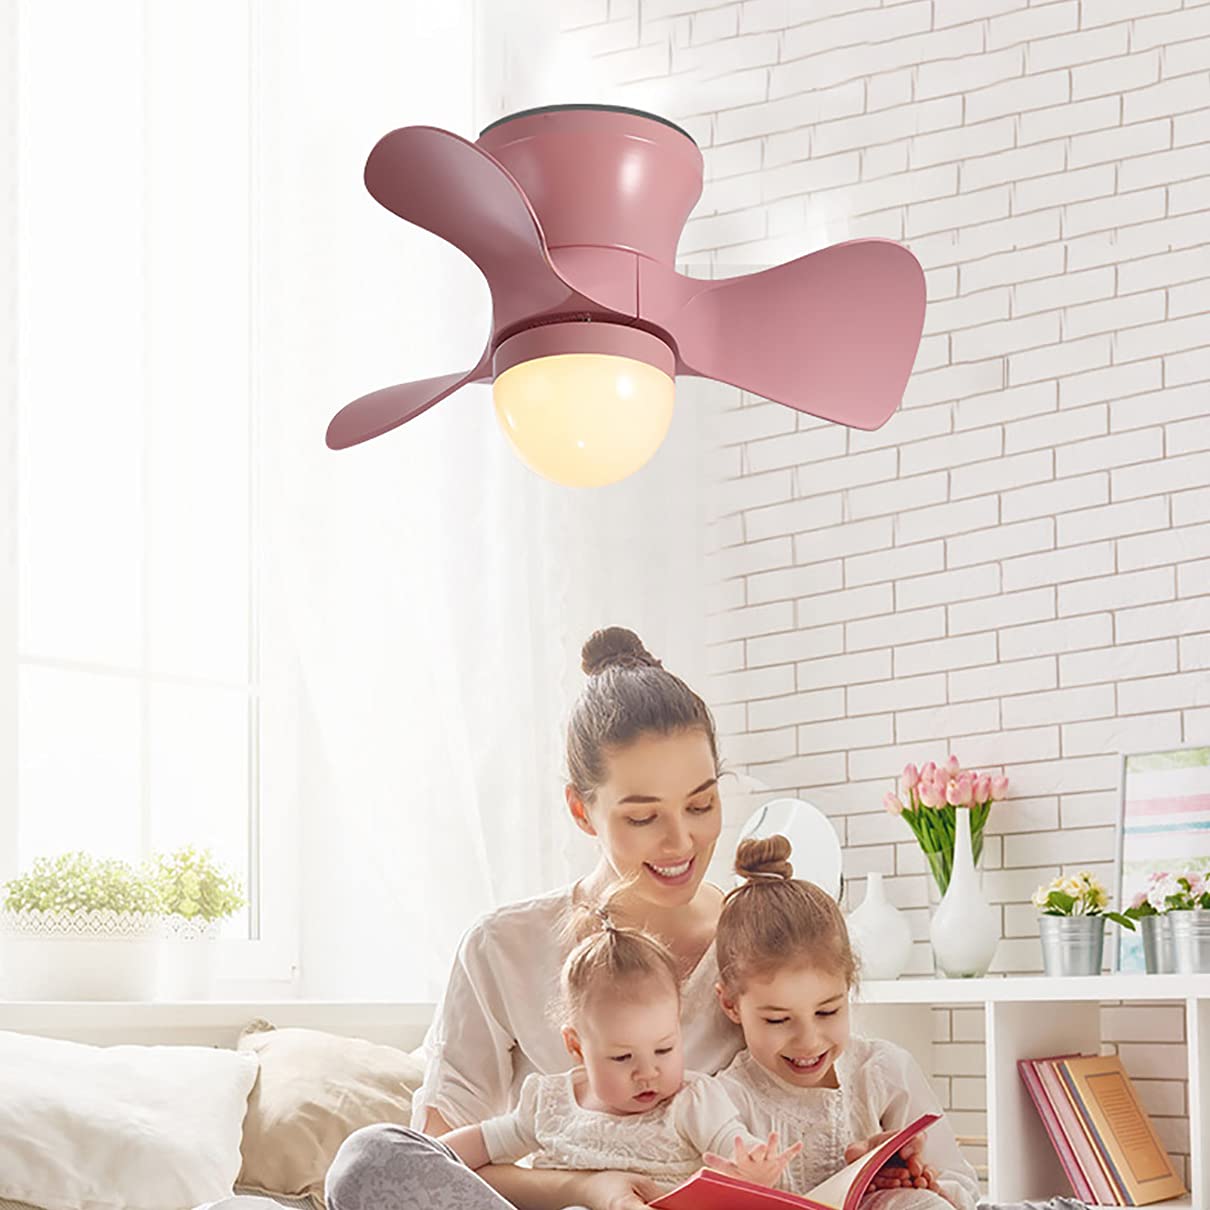 SEYFI Reversible Fan with Ceiling Light and Remote Control Kids 6 Speeds Bedroom Led Dimmable Fan Ceiling Light with Timer Modern Living Roomt Ceiling Fan Light/Pink